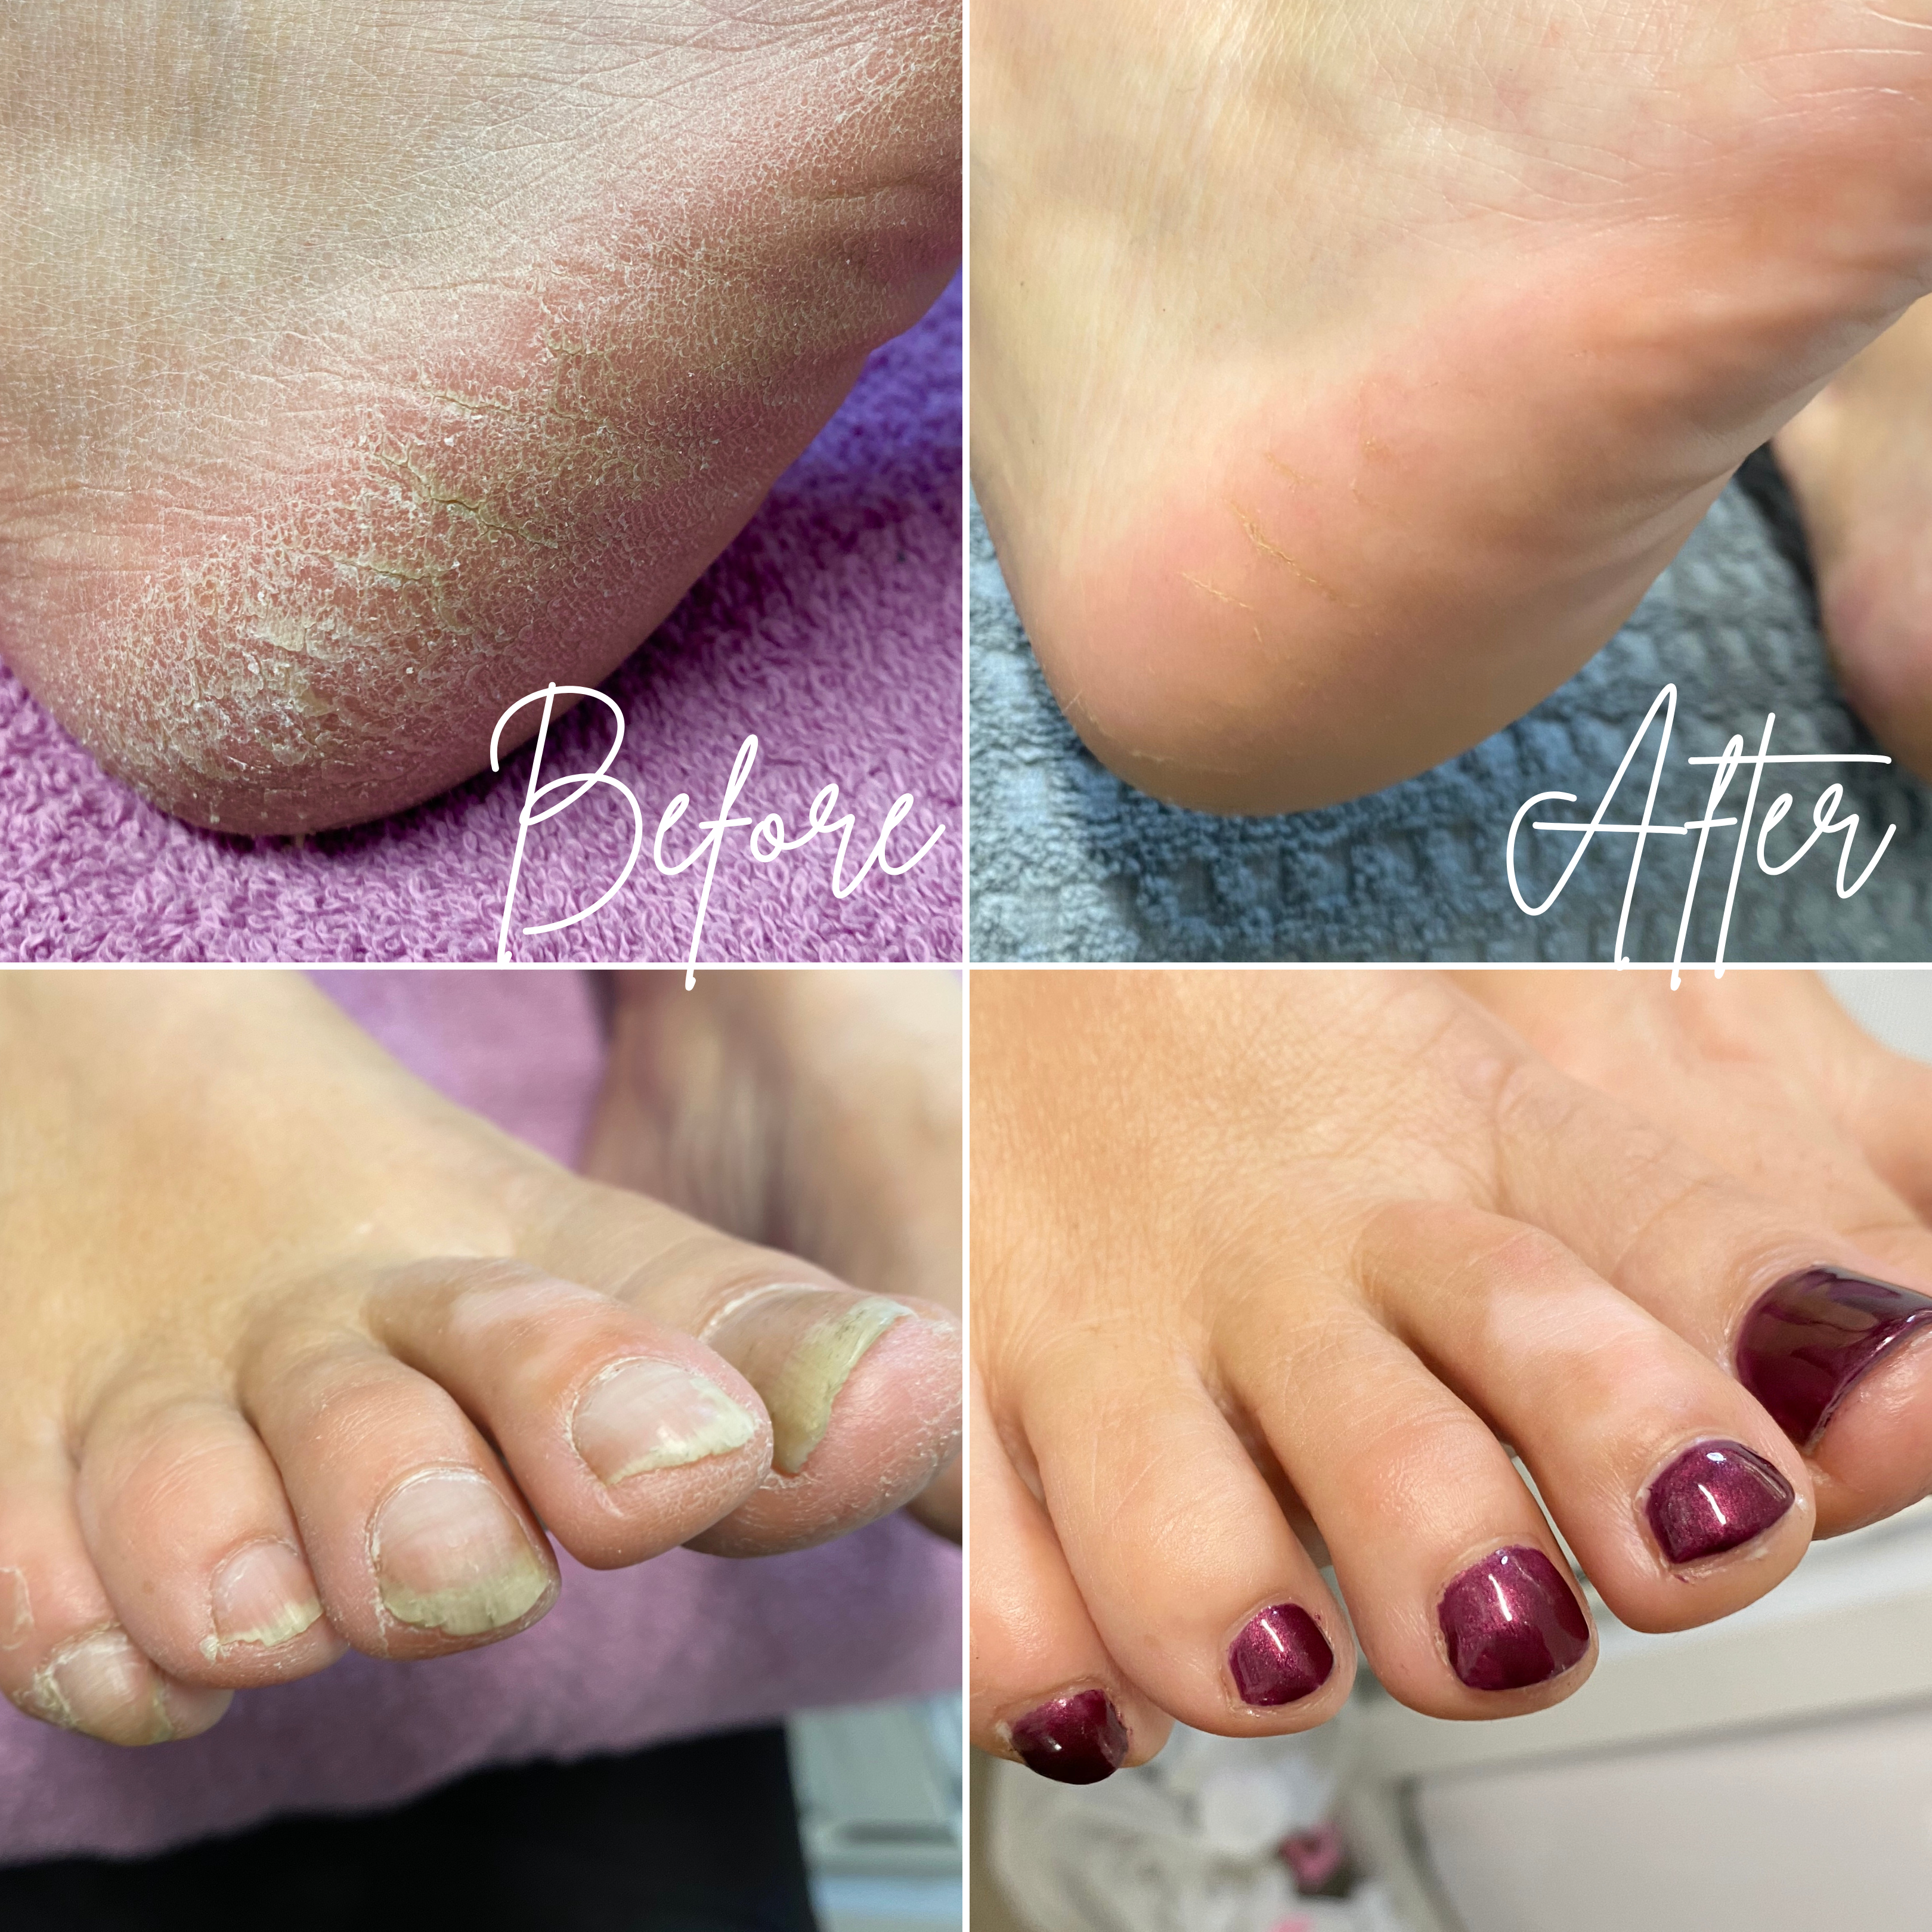 footlogix before and after